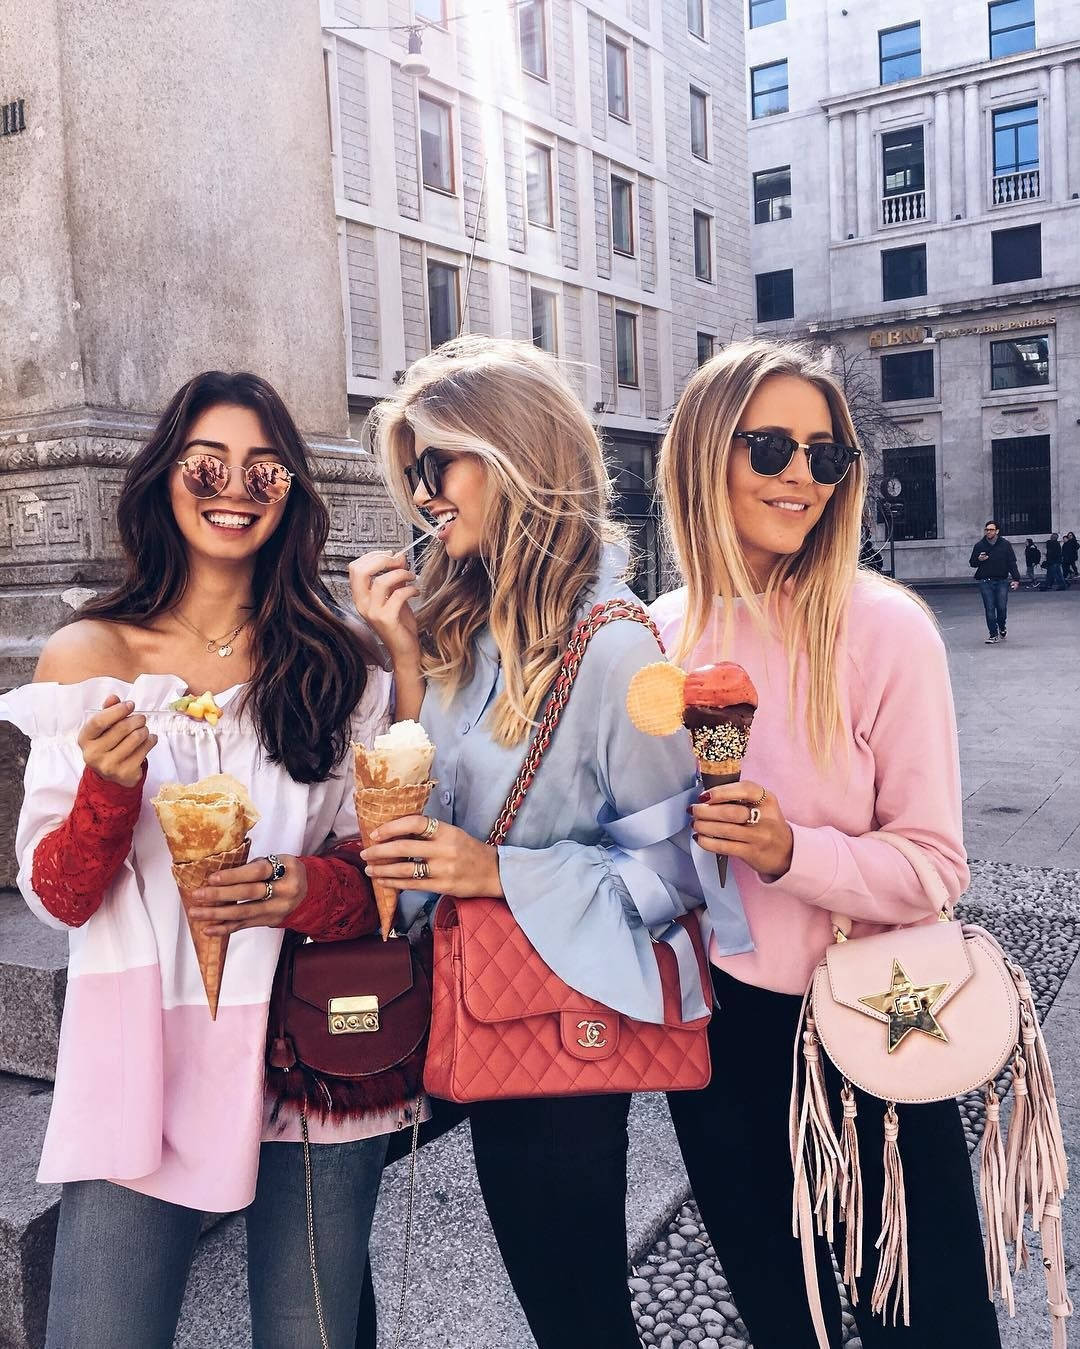 3 Best Friends With Ice Creams Wallpaper